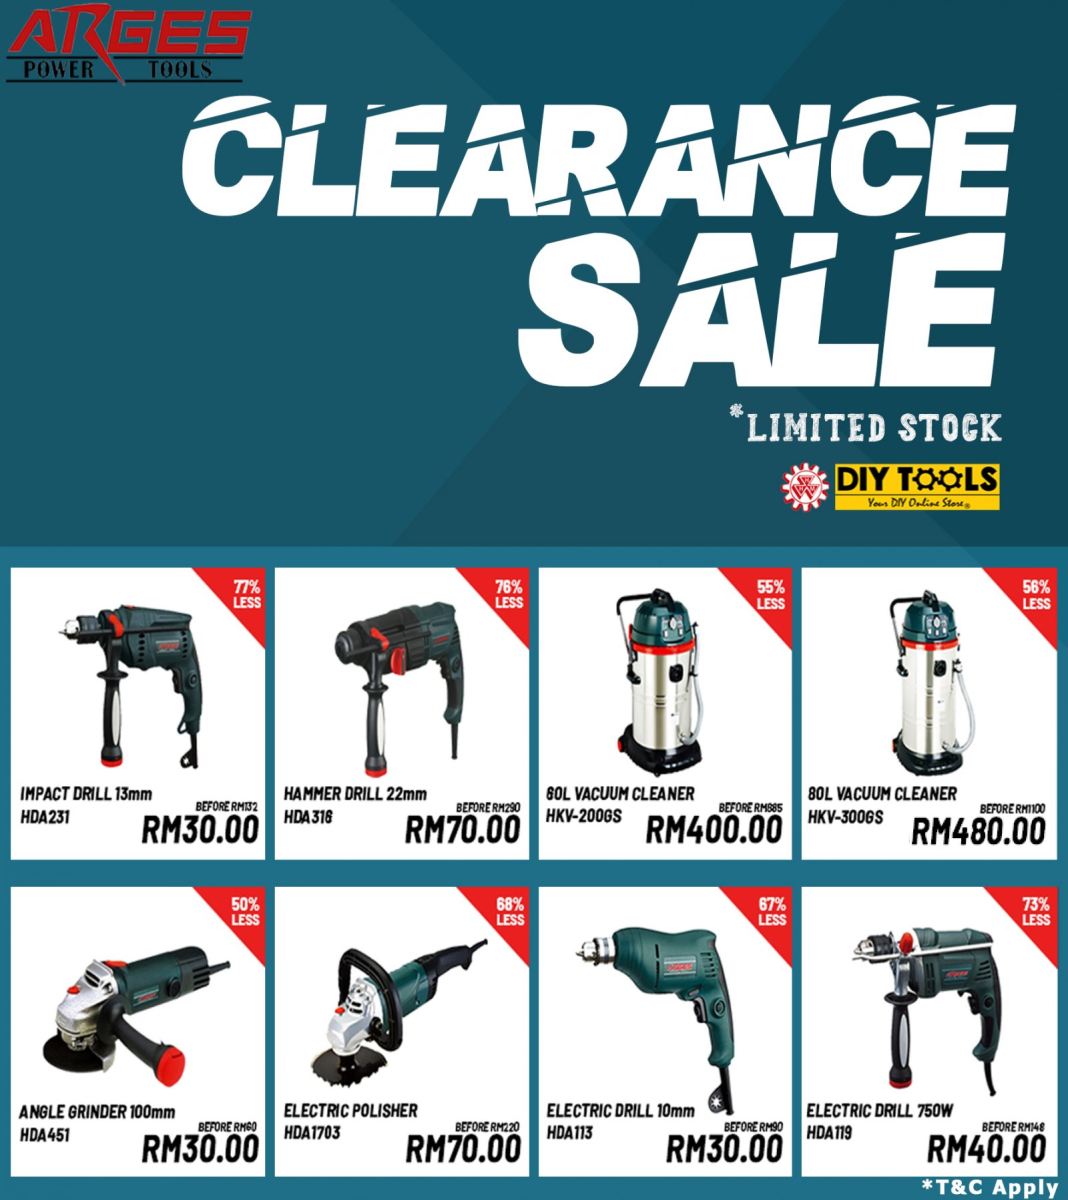 ARGES CLEARANCE SALE